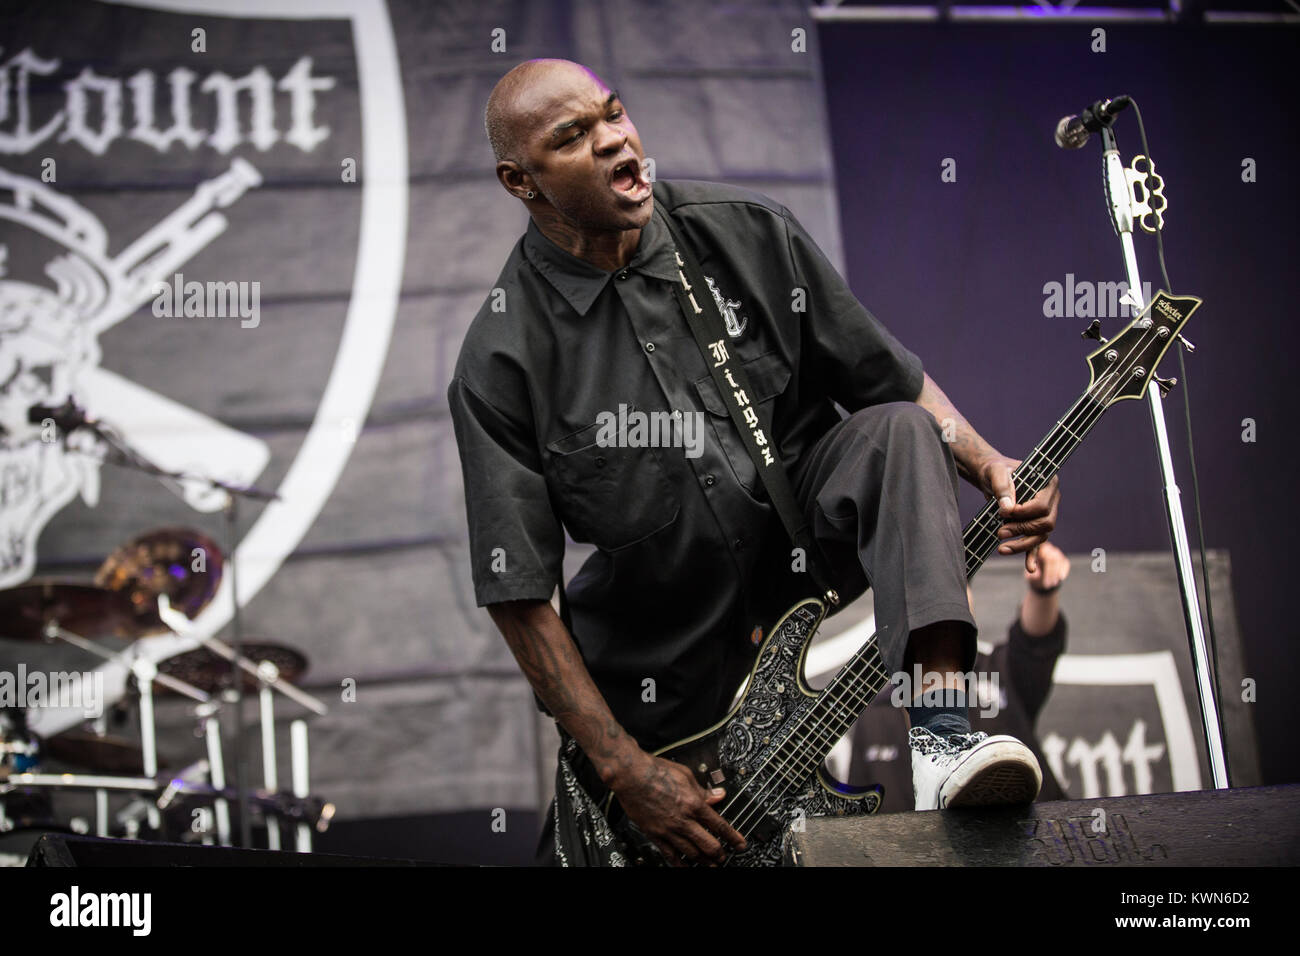 Body Count, the American heavy metal band, performs a live concert at the  Danish heavy metal festival Copenhell 2015 in Copenhagen. Here musician and Vincent  Price on bass is pictured live on